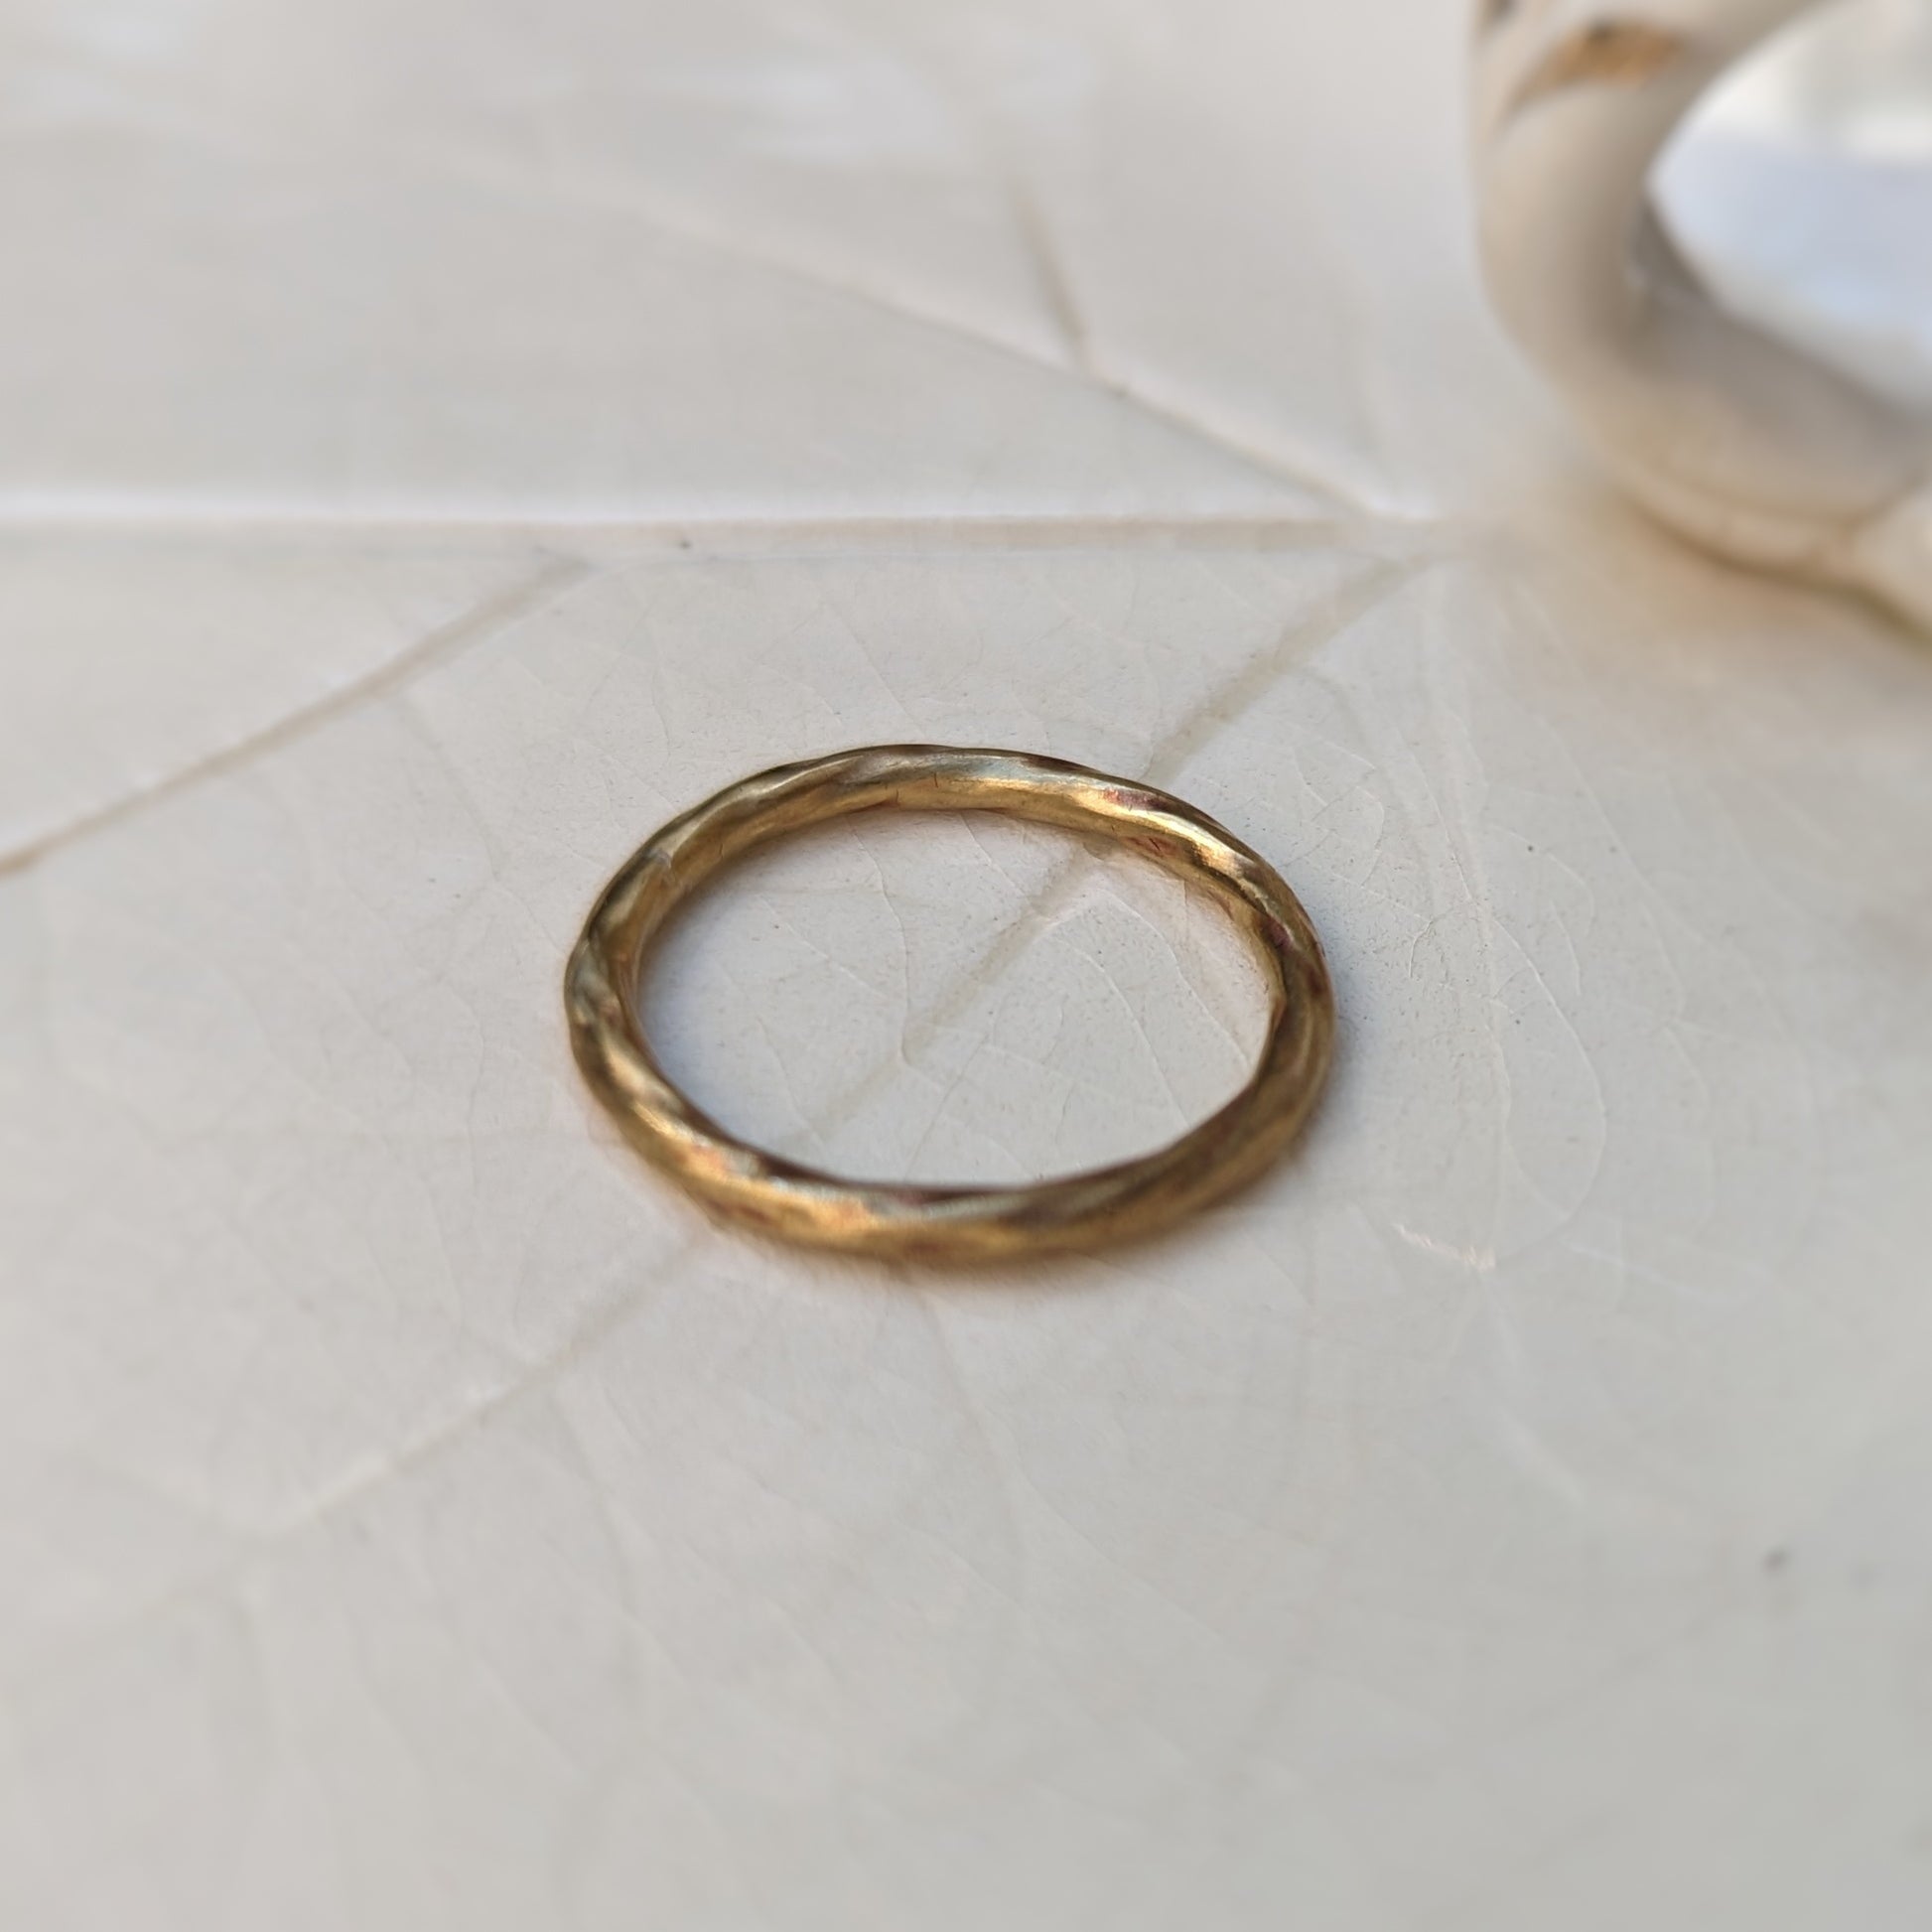 A brass ring with a subtle twist texture.